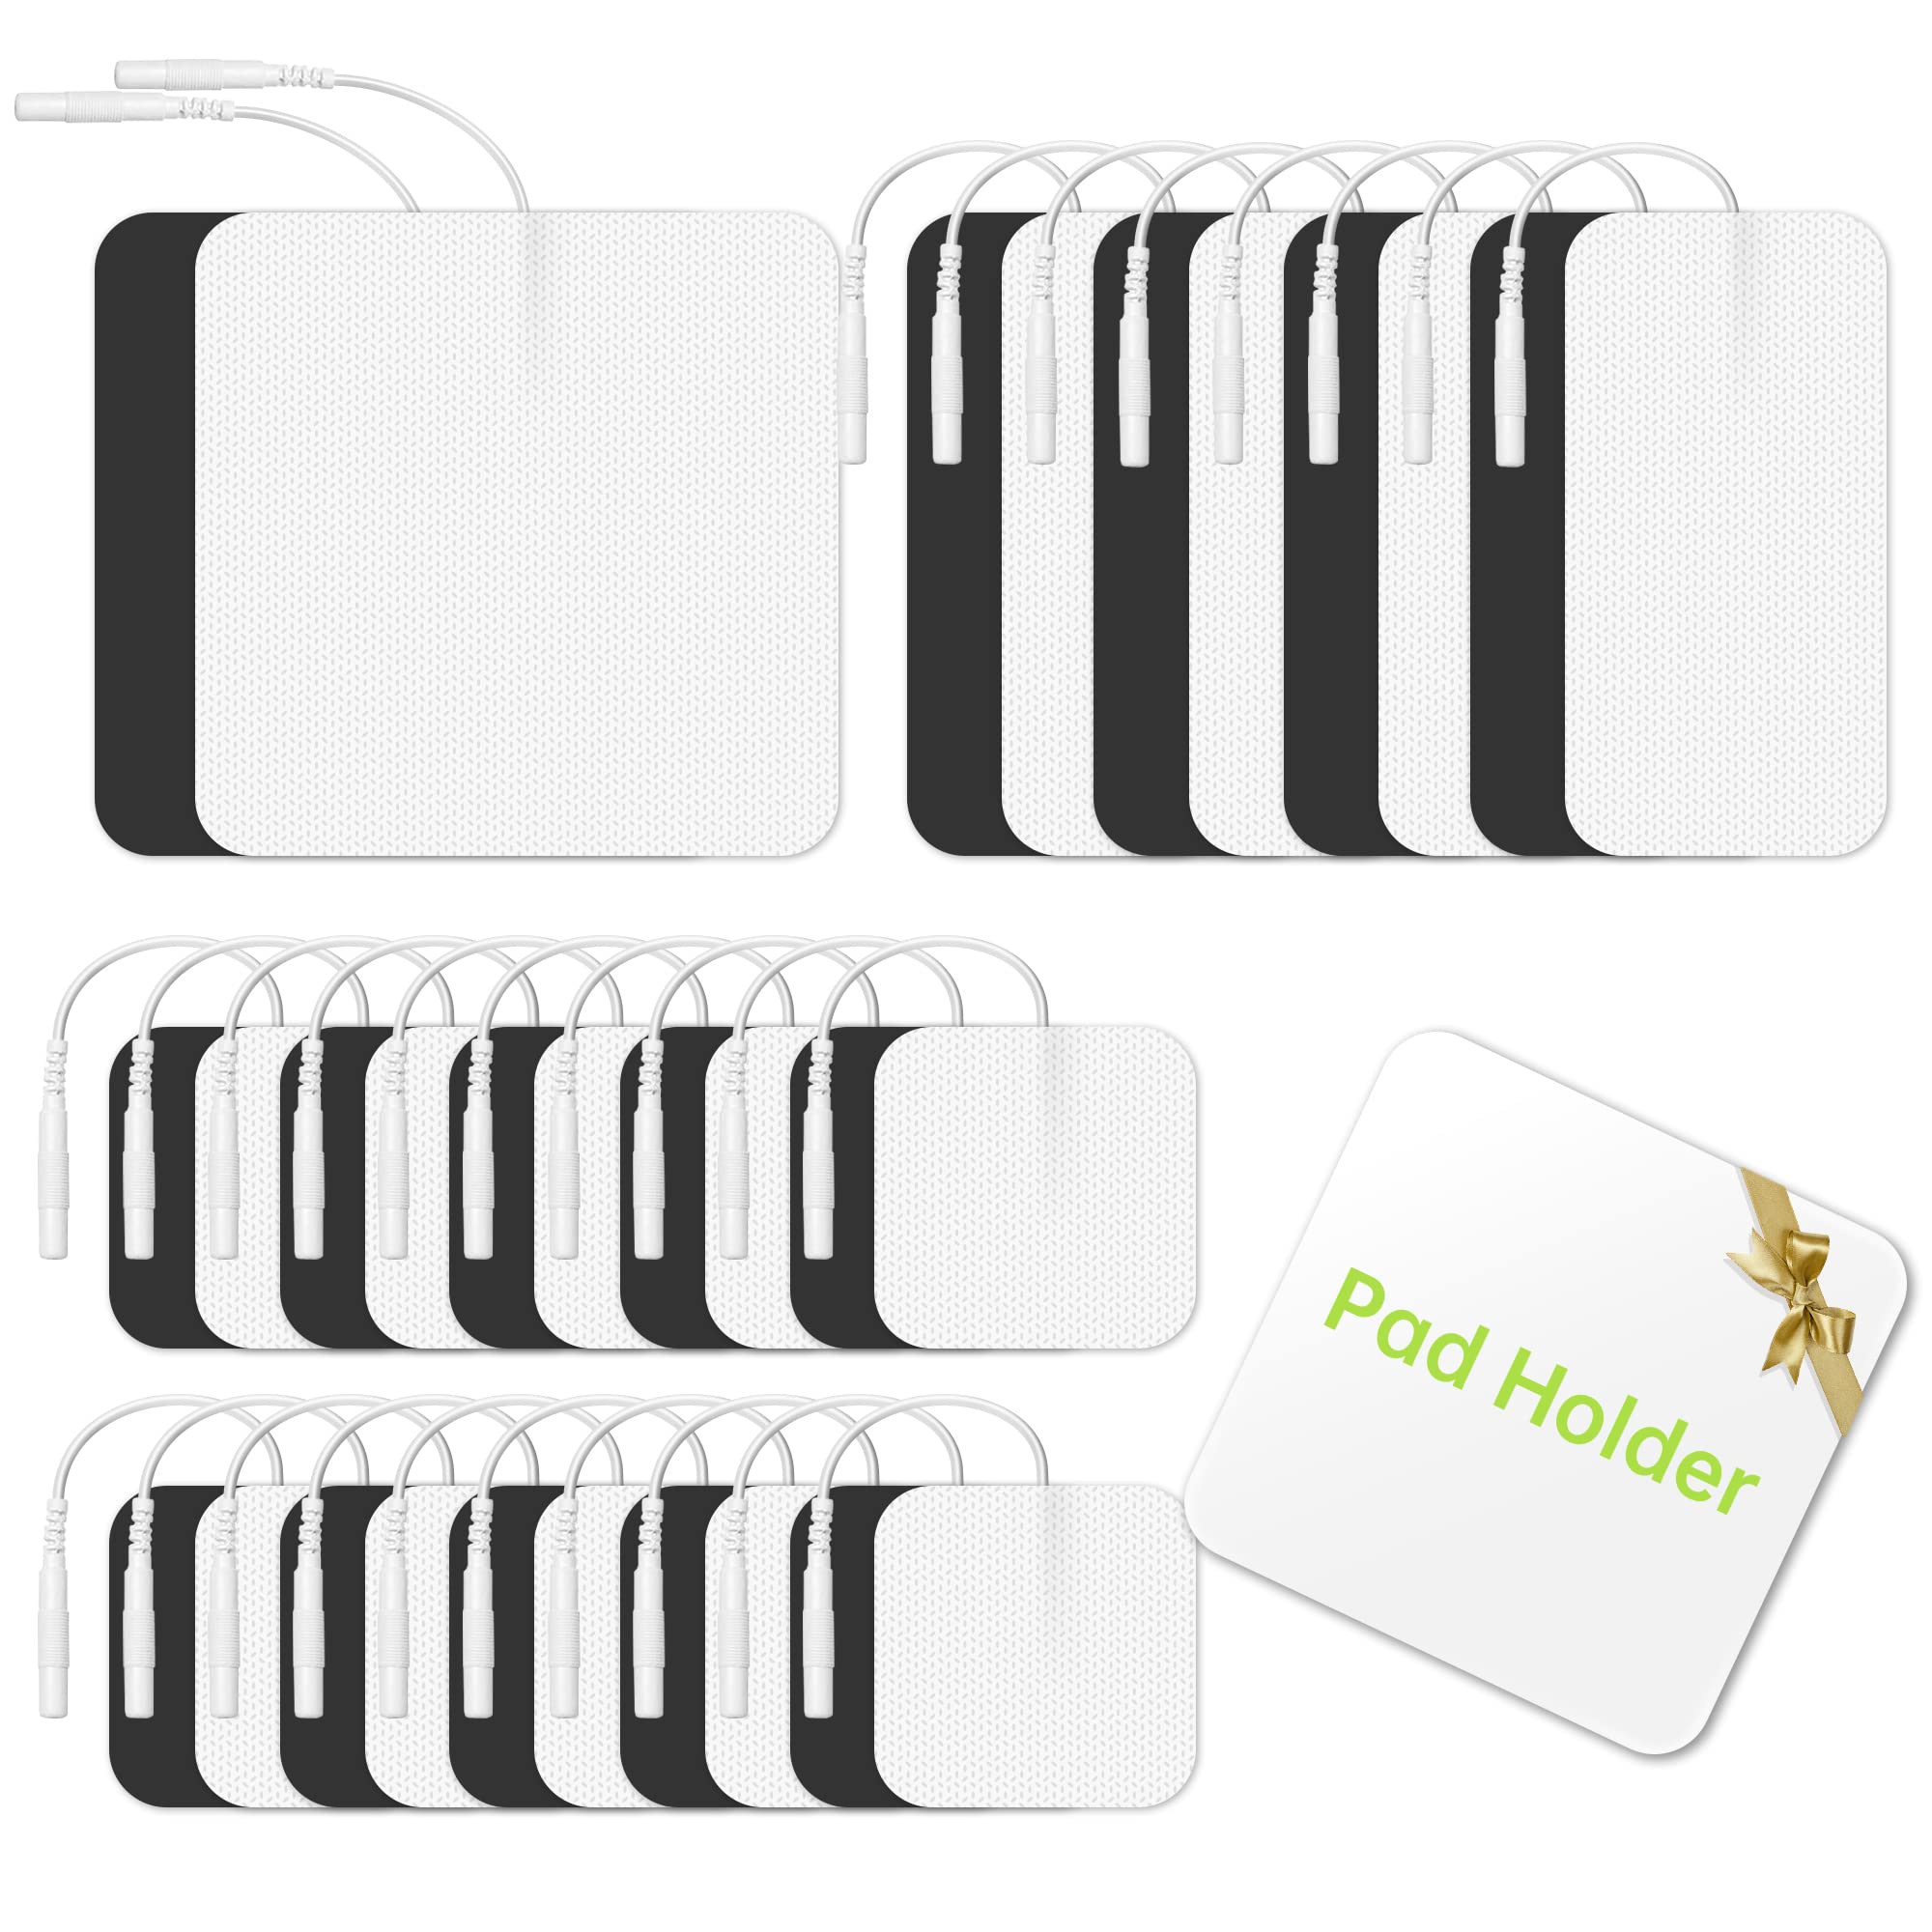 Tens 7000 Tens Unit Pad Holder, Holds (4) 2 x 2 or (2) 2 x 4 Tens Unit Replacement Pads